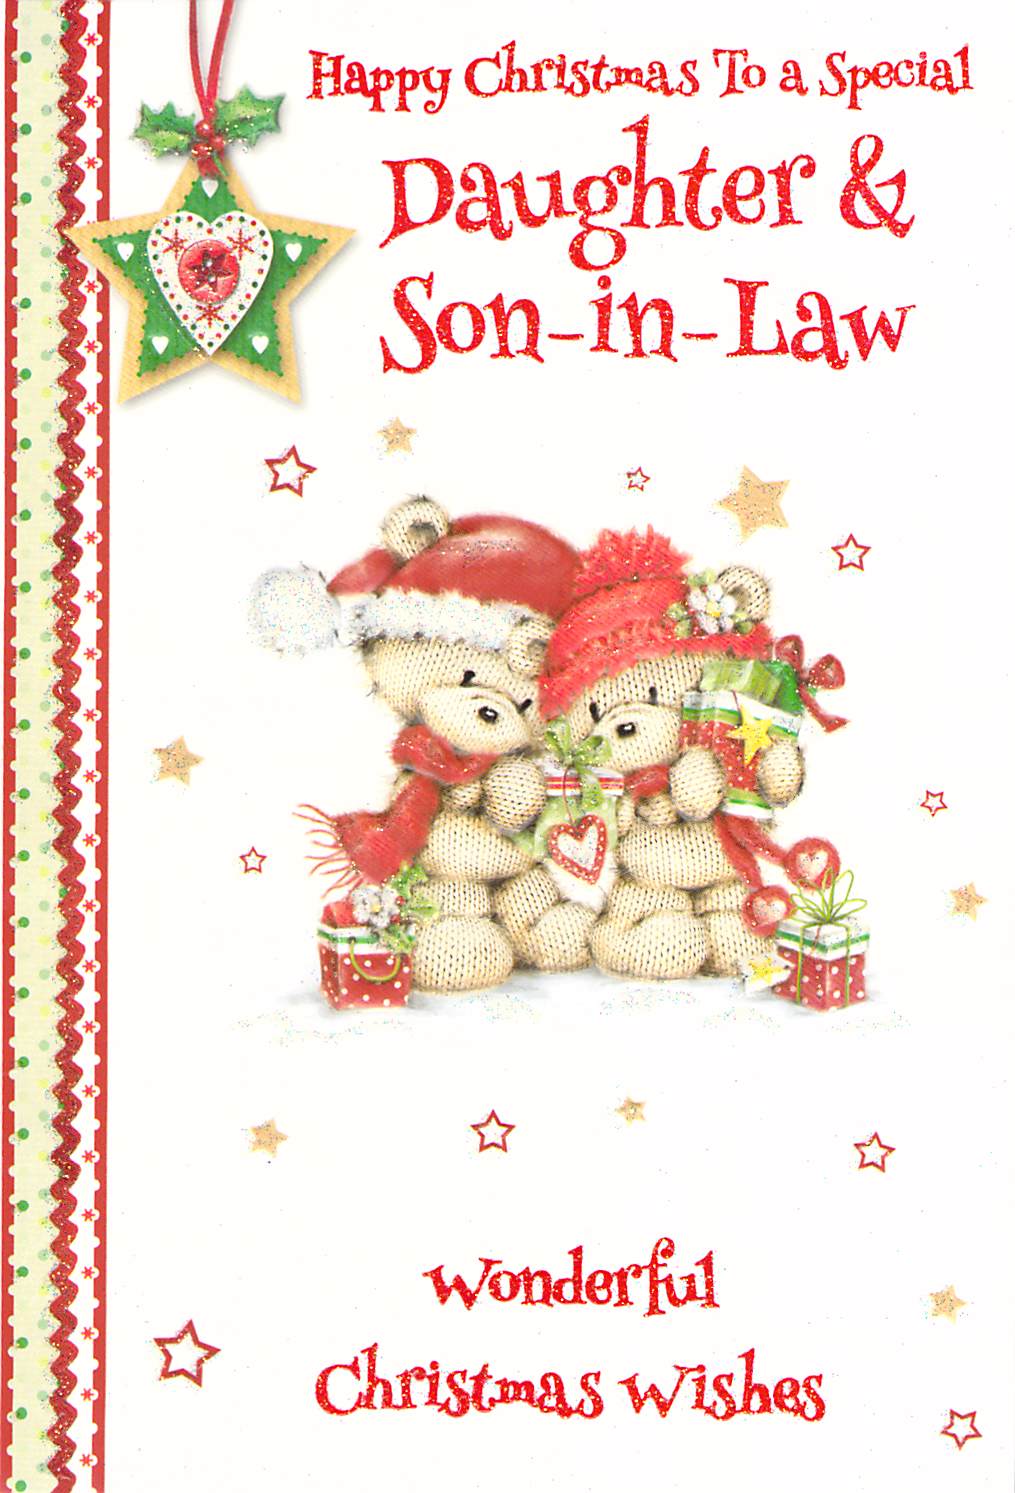 Christmas Daughter & Son In Law - Greeting Card - Multi Buy Discount - Free P&P